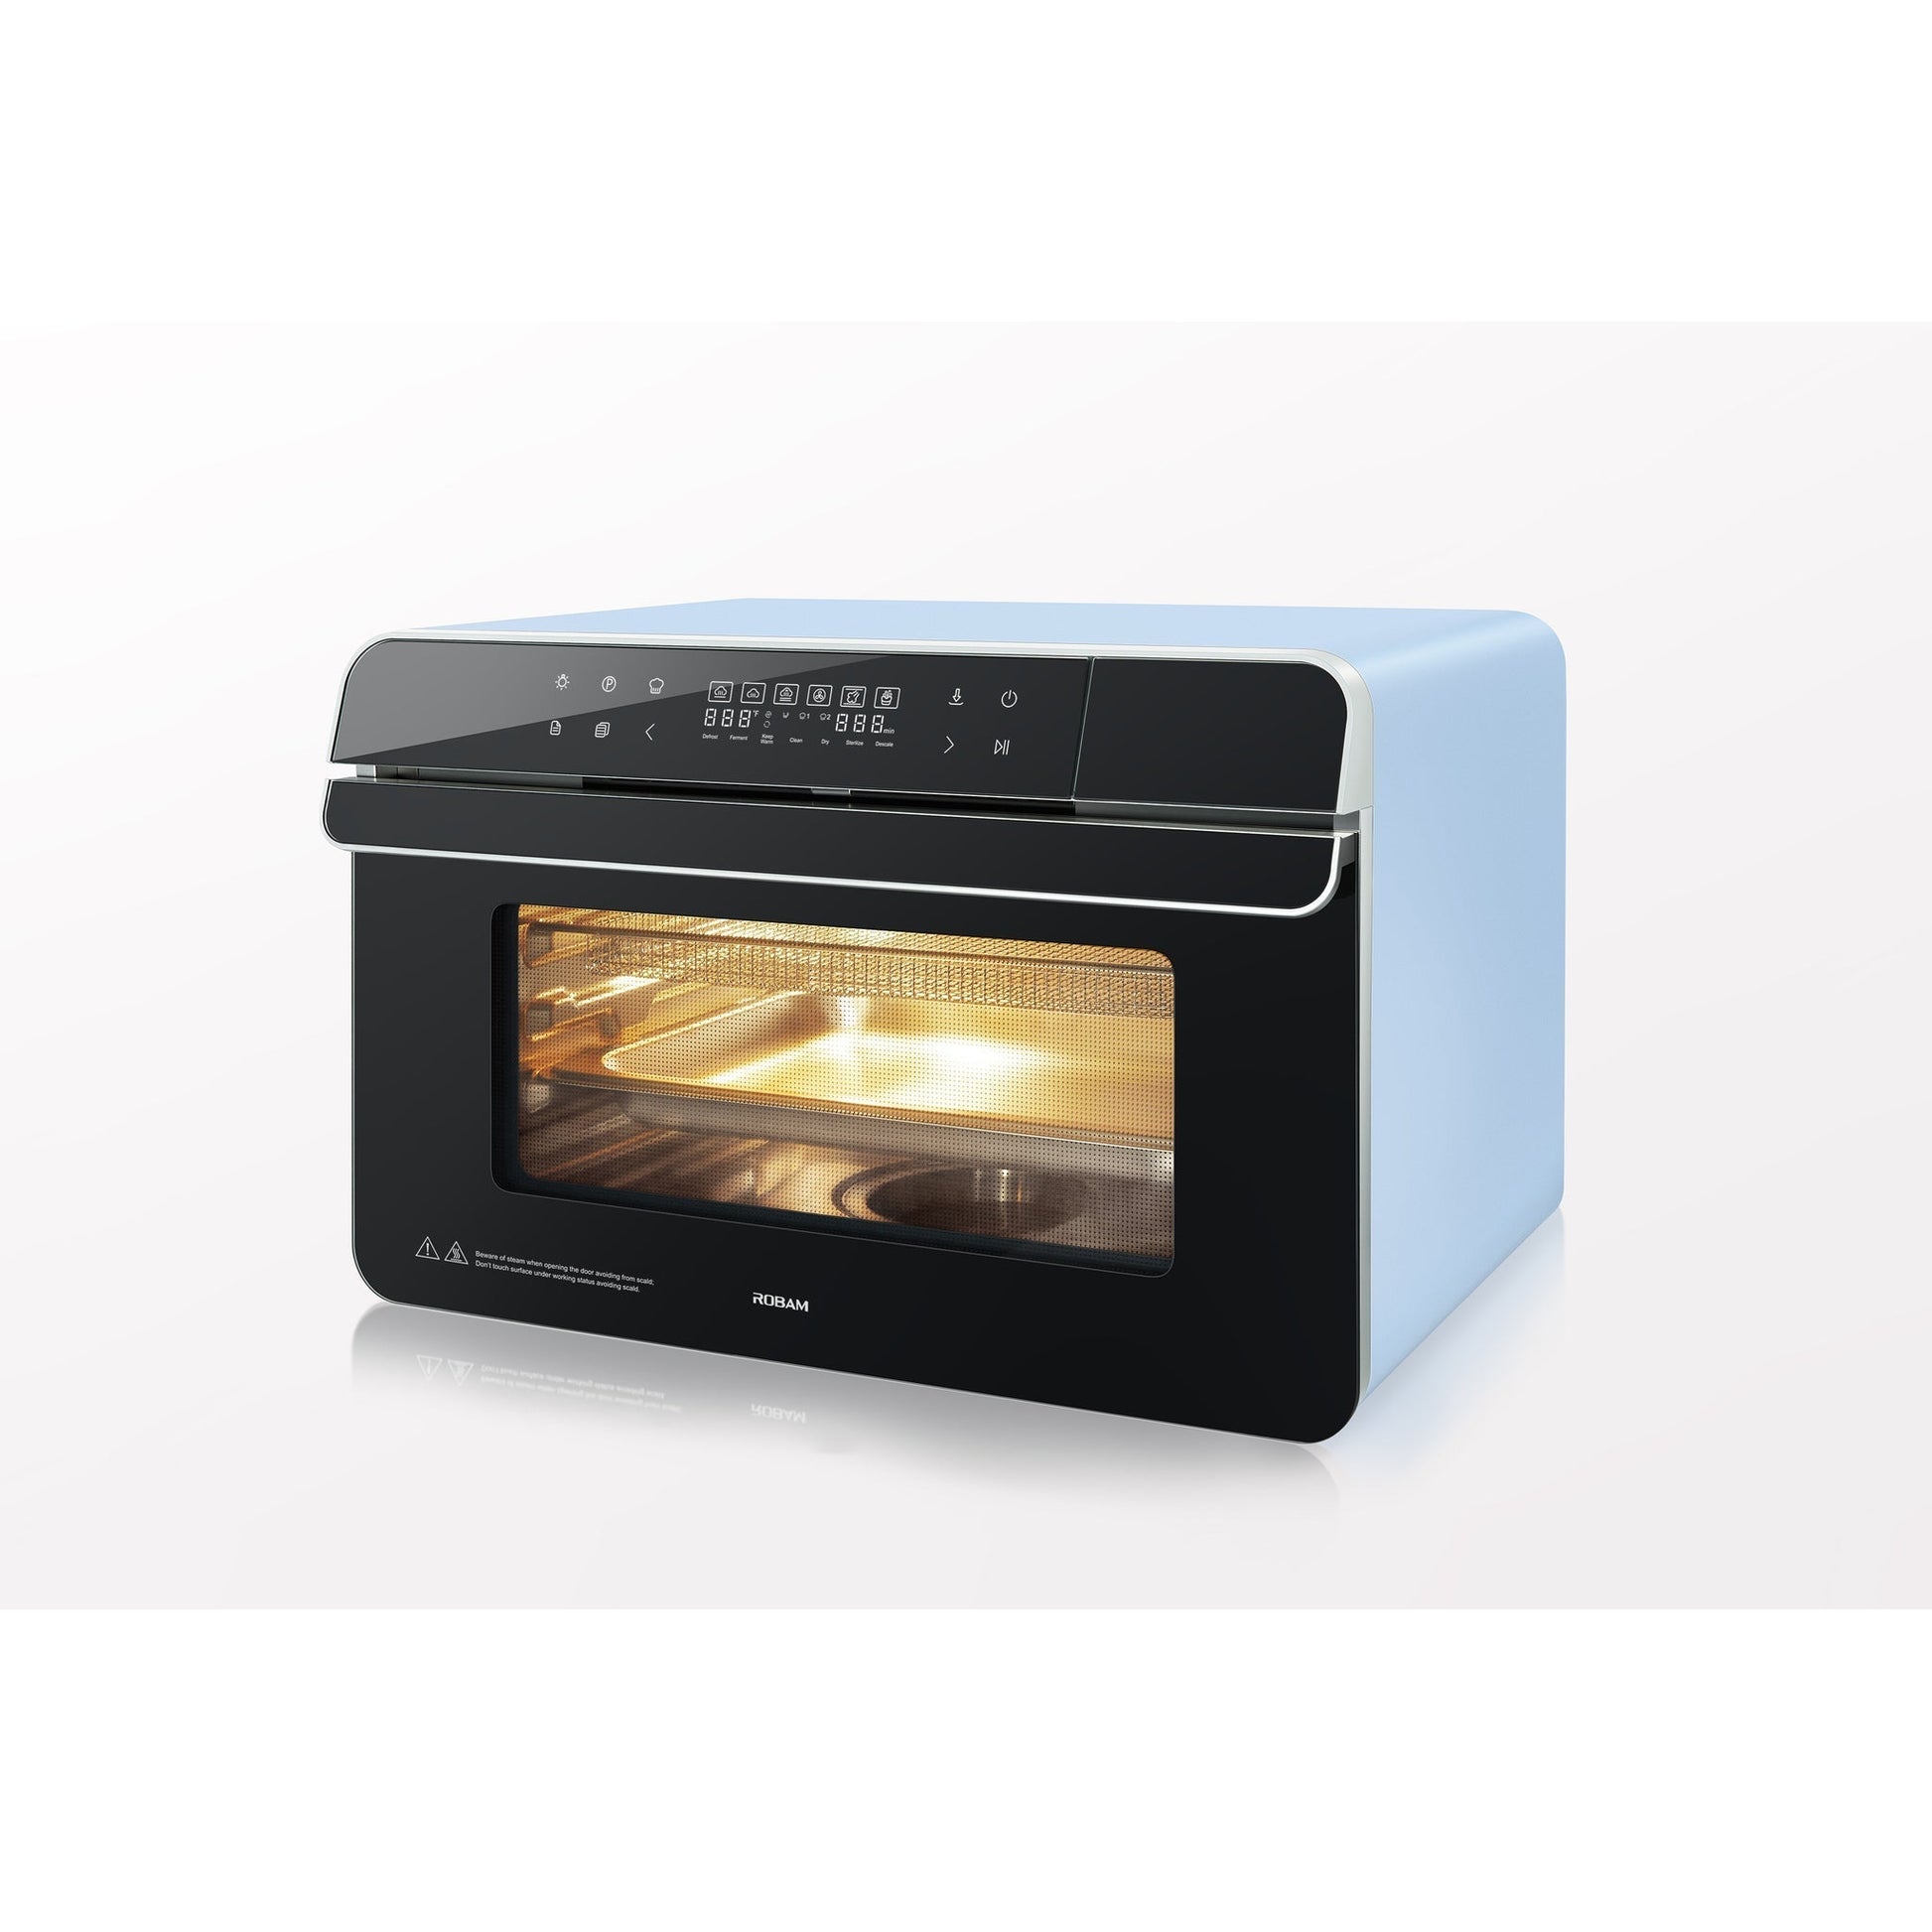 ROBAM 20-in-1 R-BOX CT763 Countertop Convection Oven | Air Fry, Grill, Bake  & Steam | Wide Temperature Precision | Spacious Capacity, Ergonomic